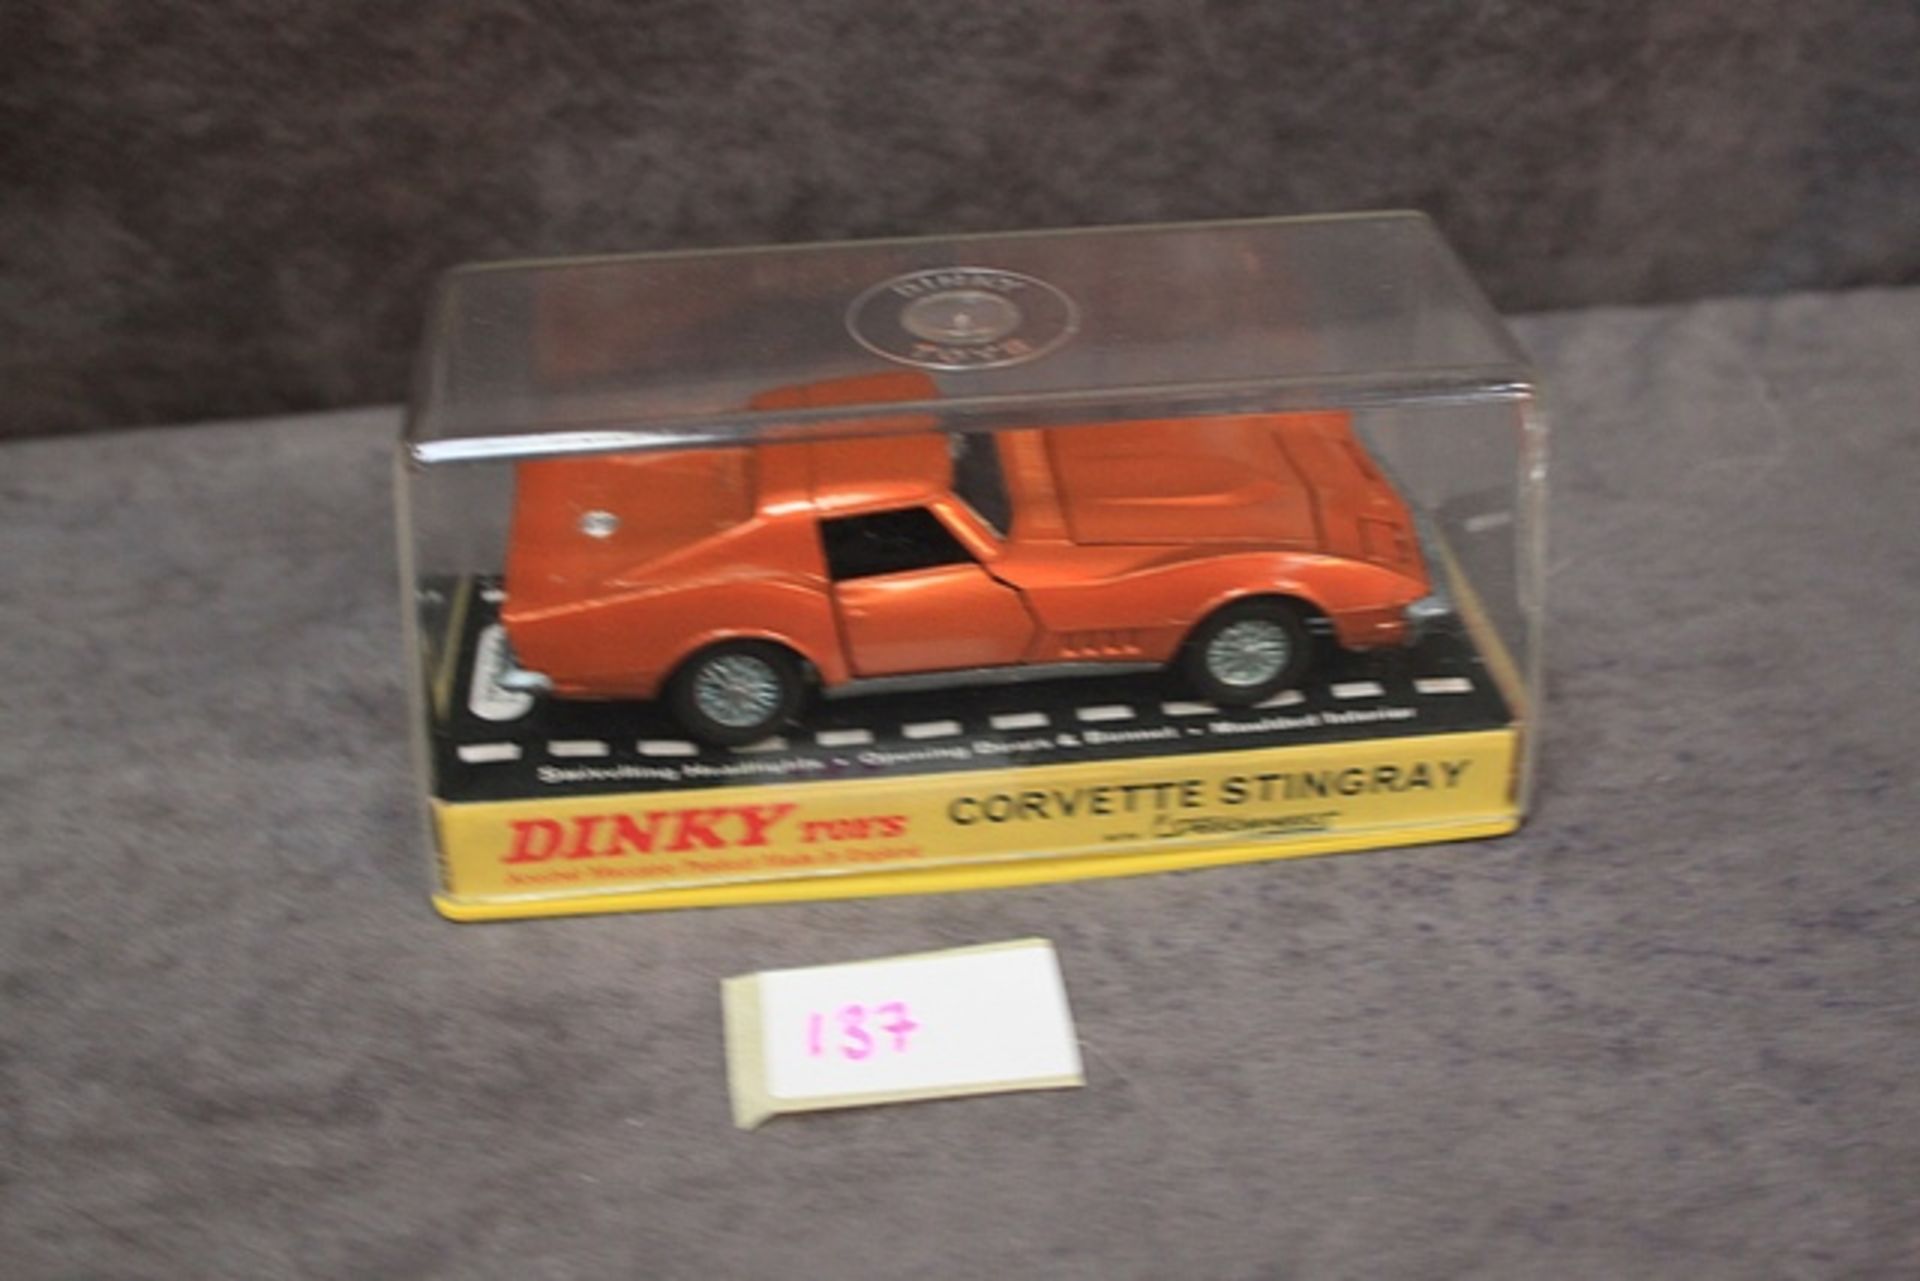 Mint Dinky Toys diecast #221 Corvette Stingray with painted headlights in excellent display box -